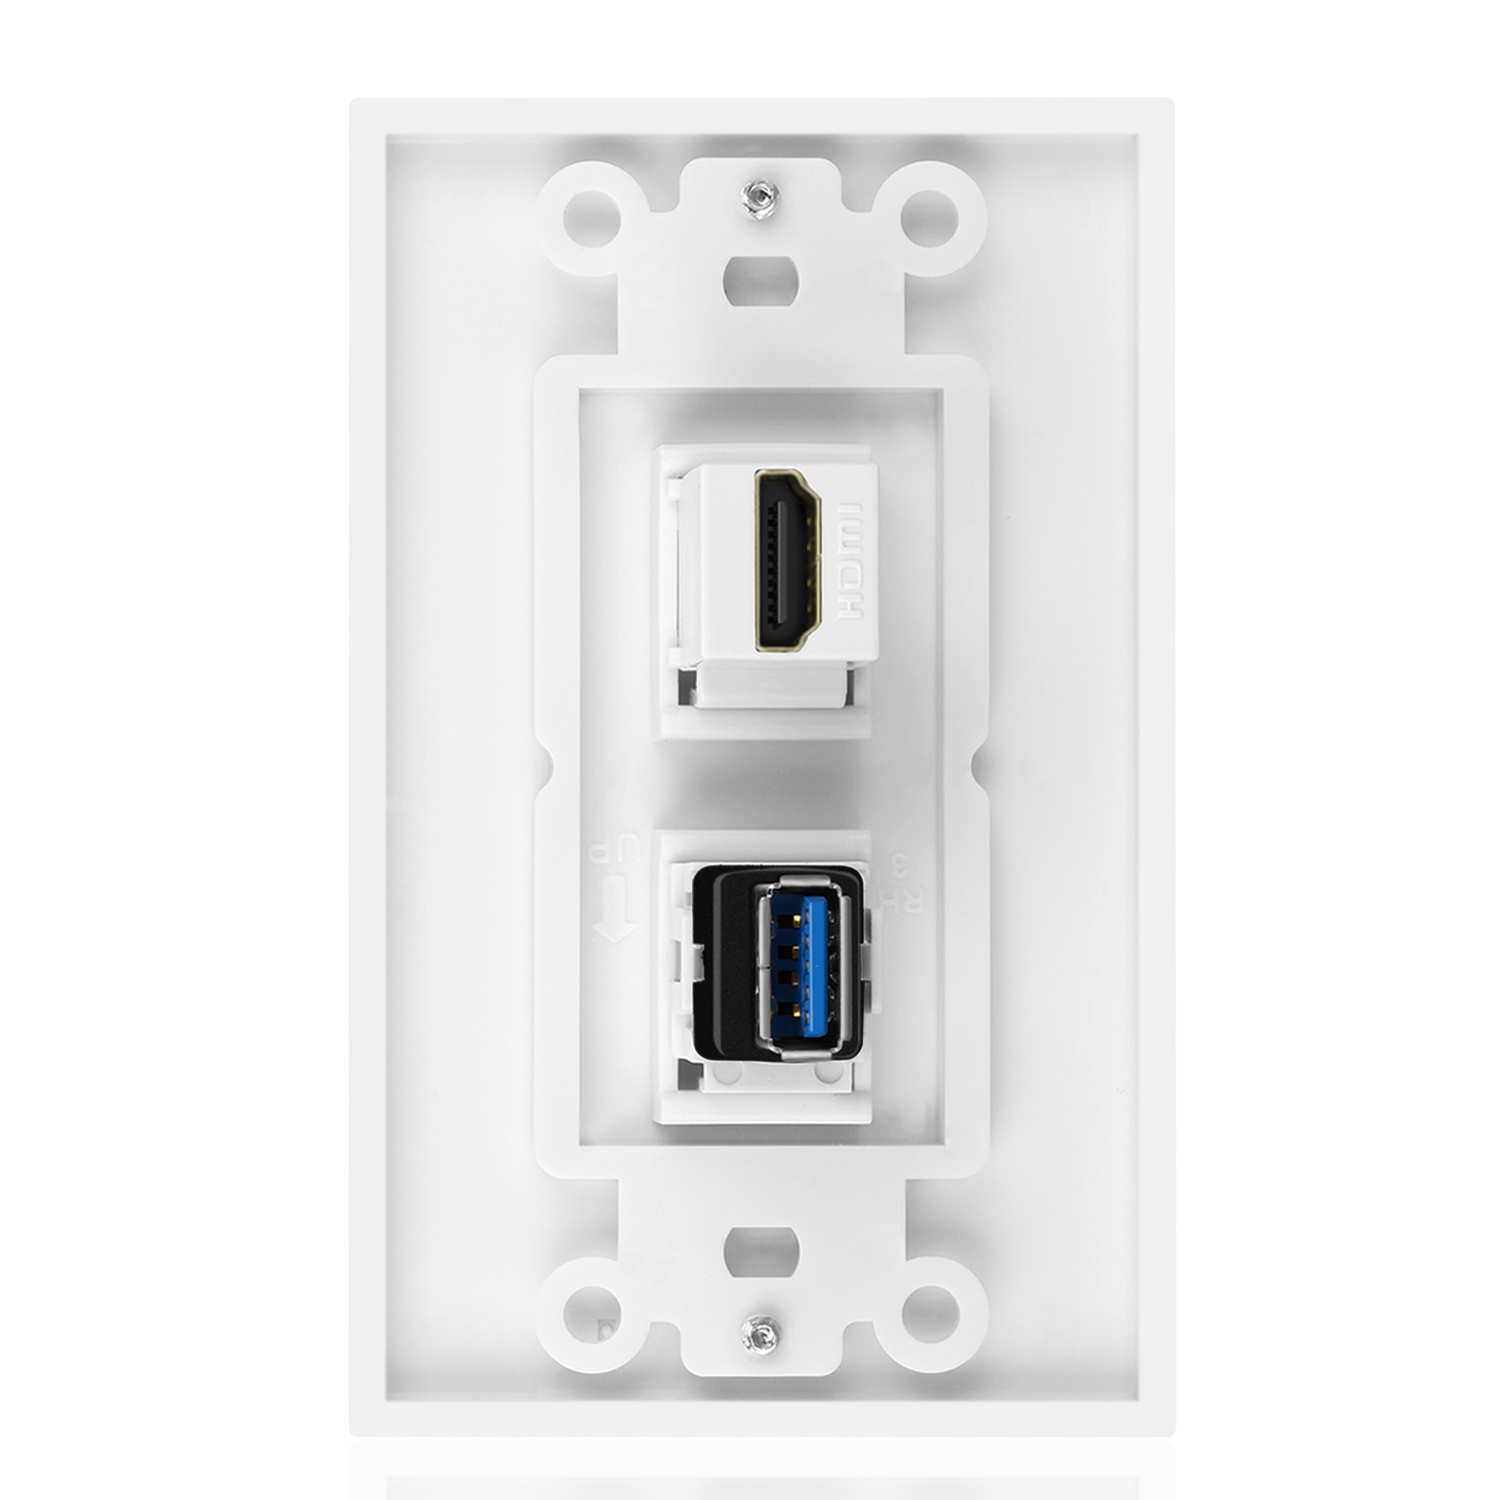 USB HDMI Hub eliminates the need for bulky adapters or wall charging converter; creates a central charging and entertaining station for the family; Hide all the unnecessary wires and keep your space clutter-free; The white color matches most light switch and power plug allows a consistent color scheme throughout your home